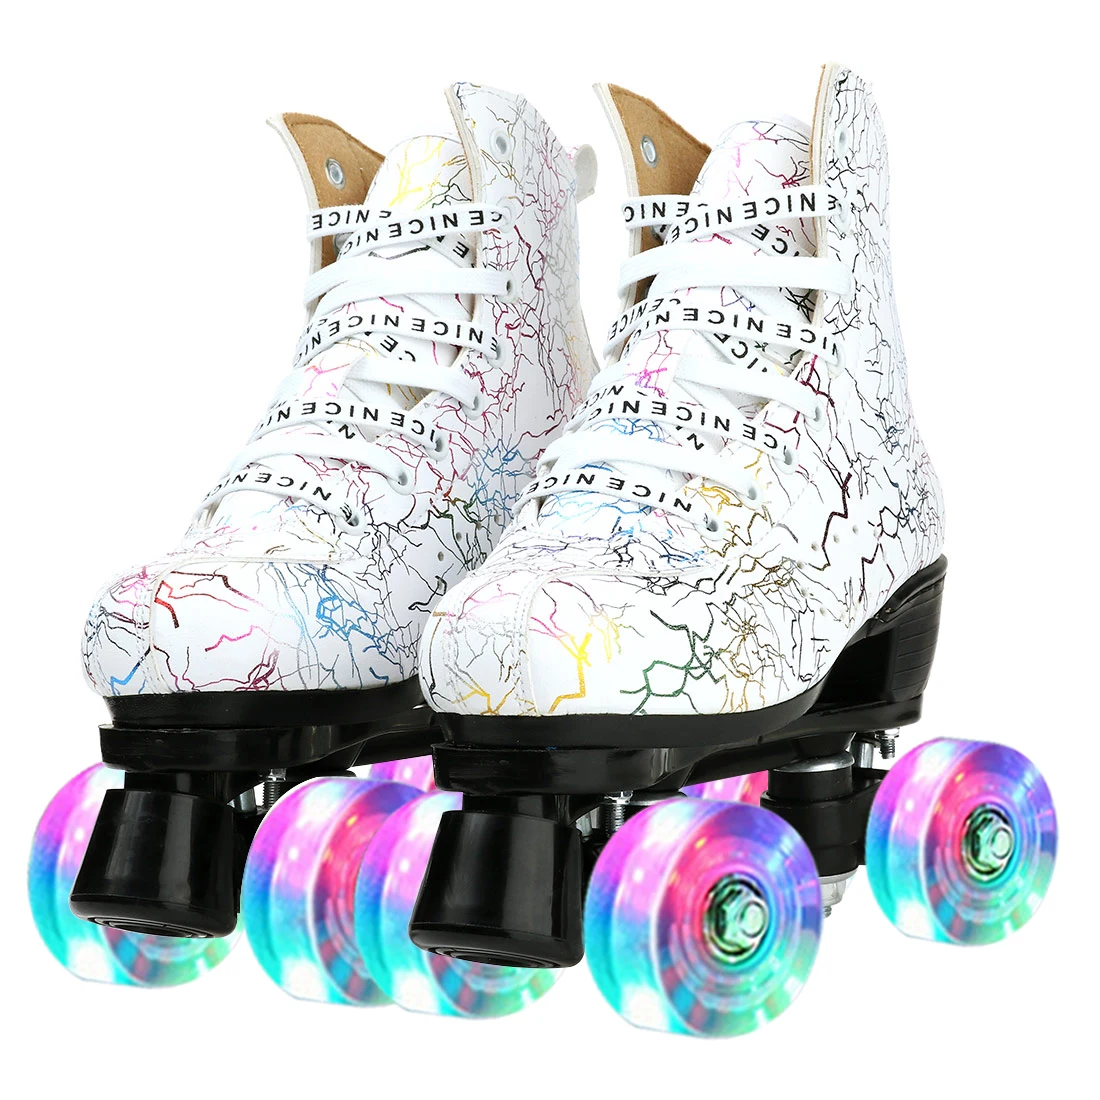 Pu Leather Roller Skates Shoes With Flash Pu Wheel Brake Fashion Patines Lace-Up Sneaker Double Row Adult Women Patins 36-45